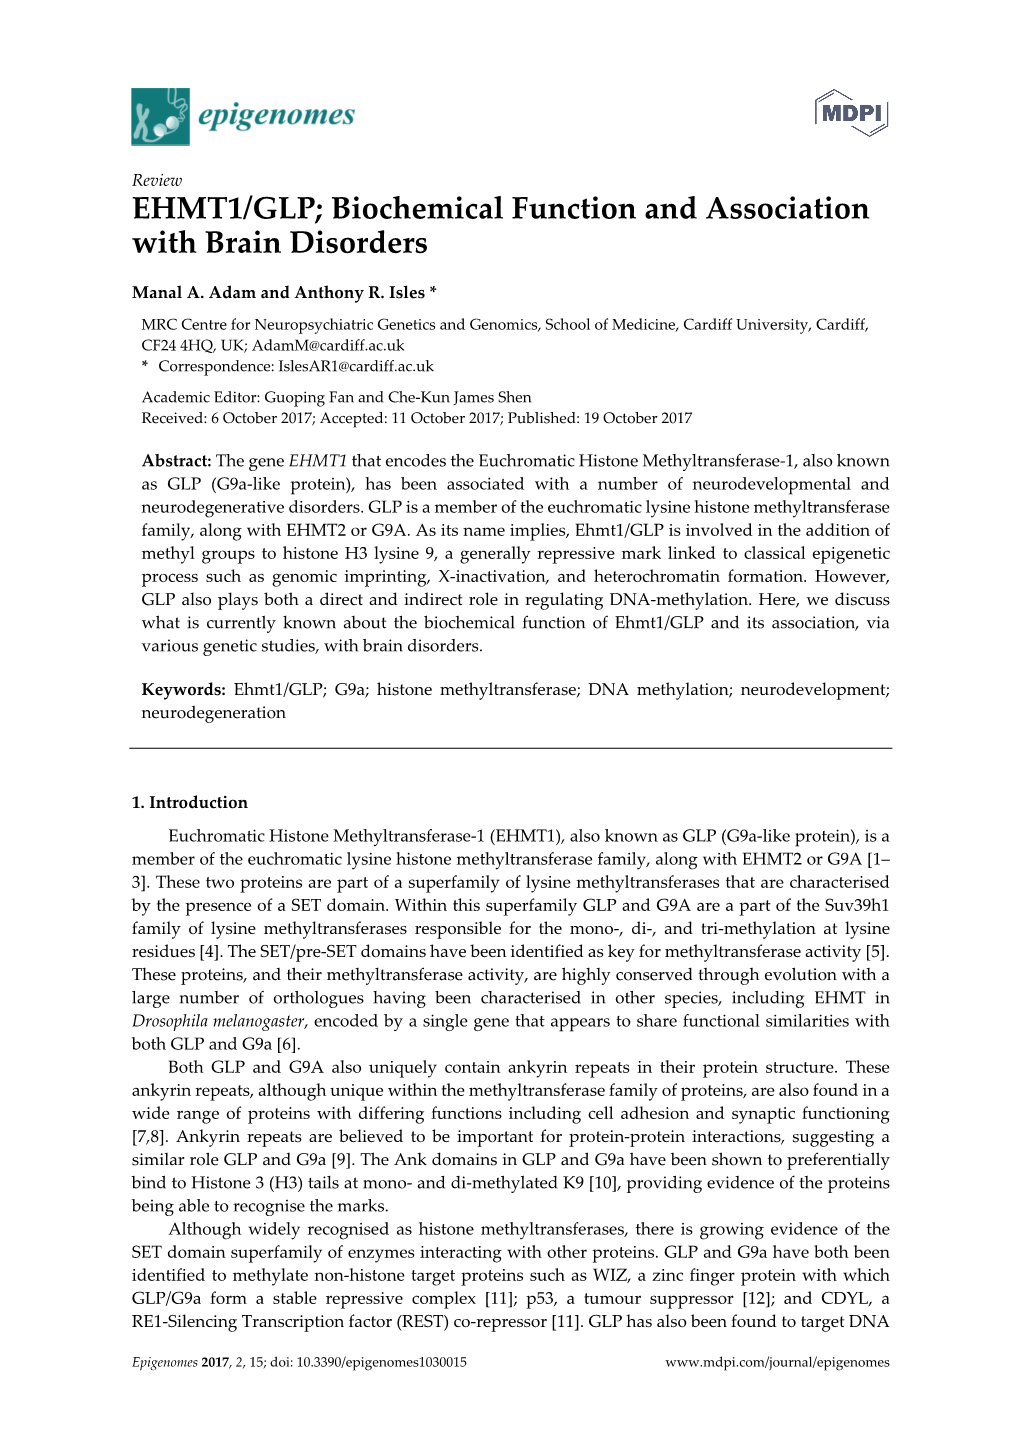 EHMT1/GLP; Biochemical Function and Association with Brain Disorders